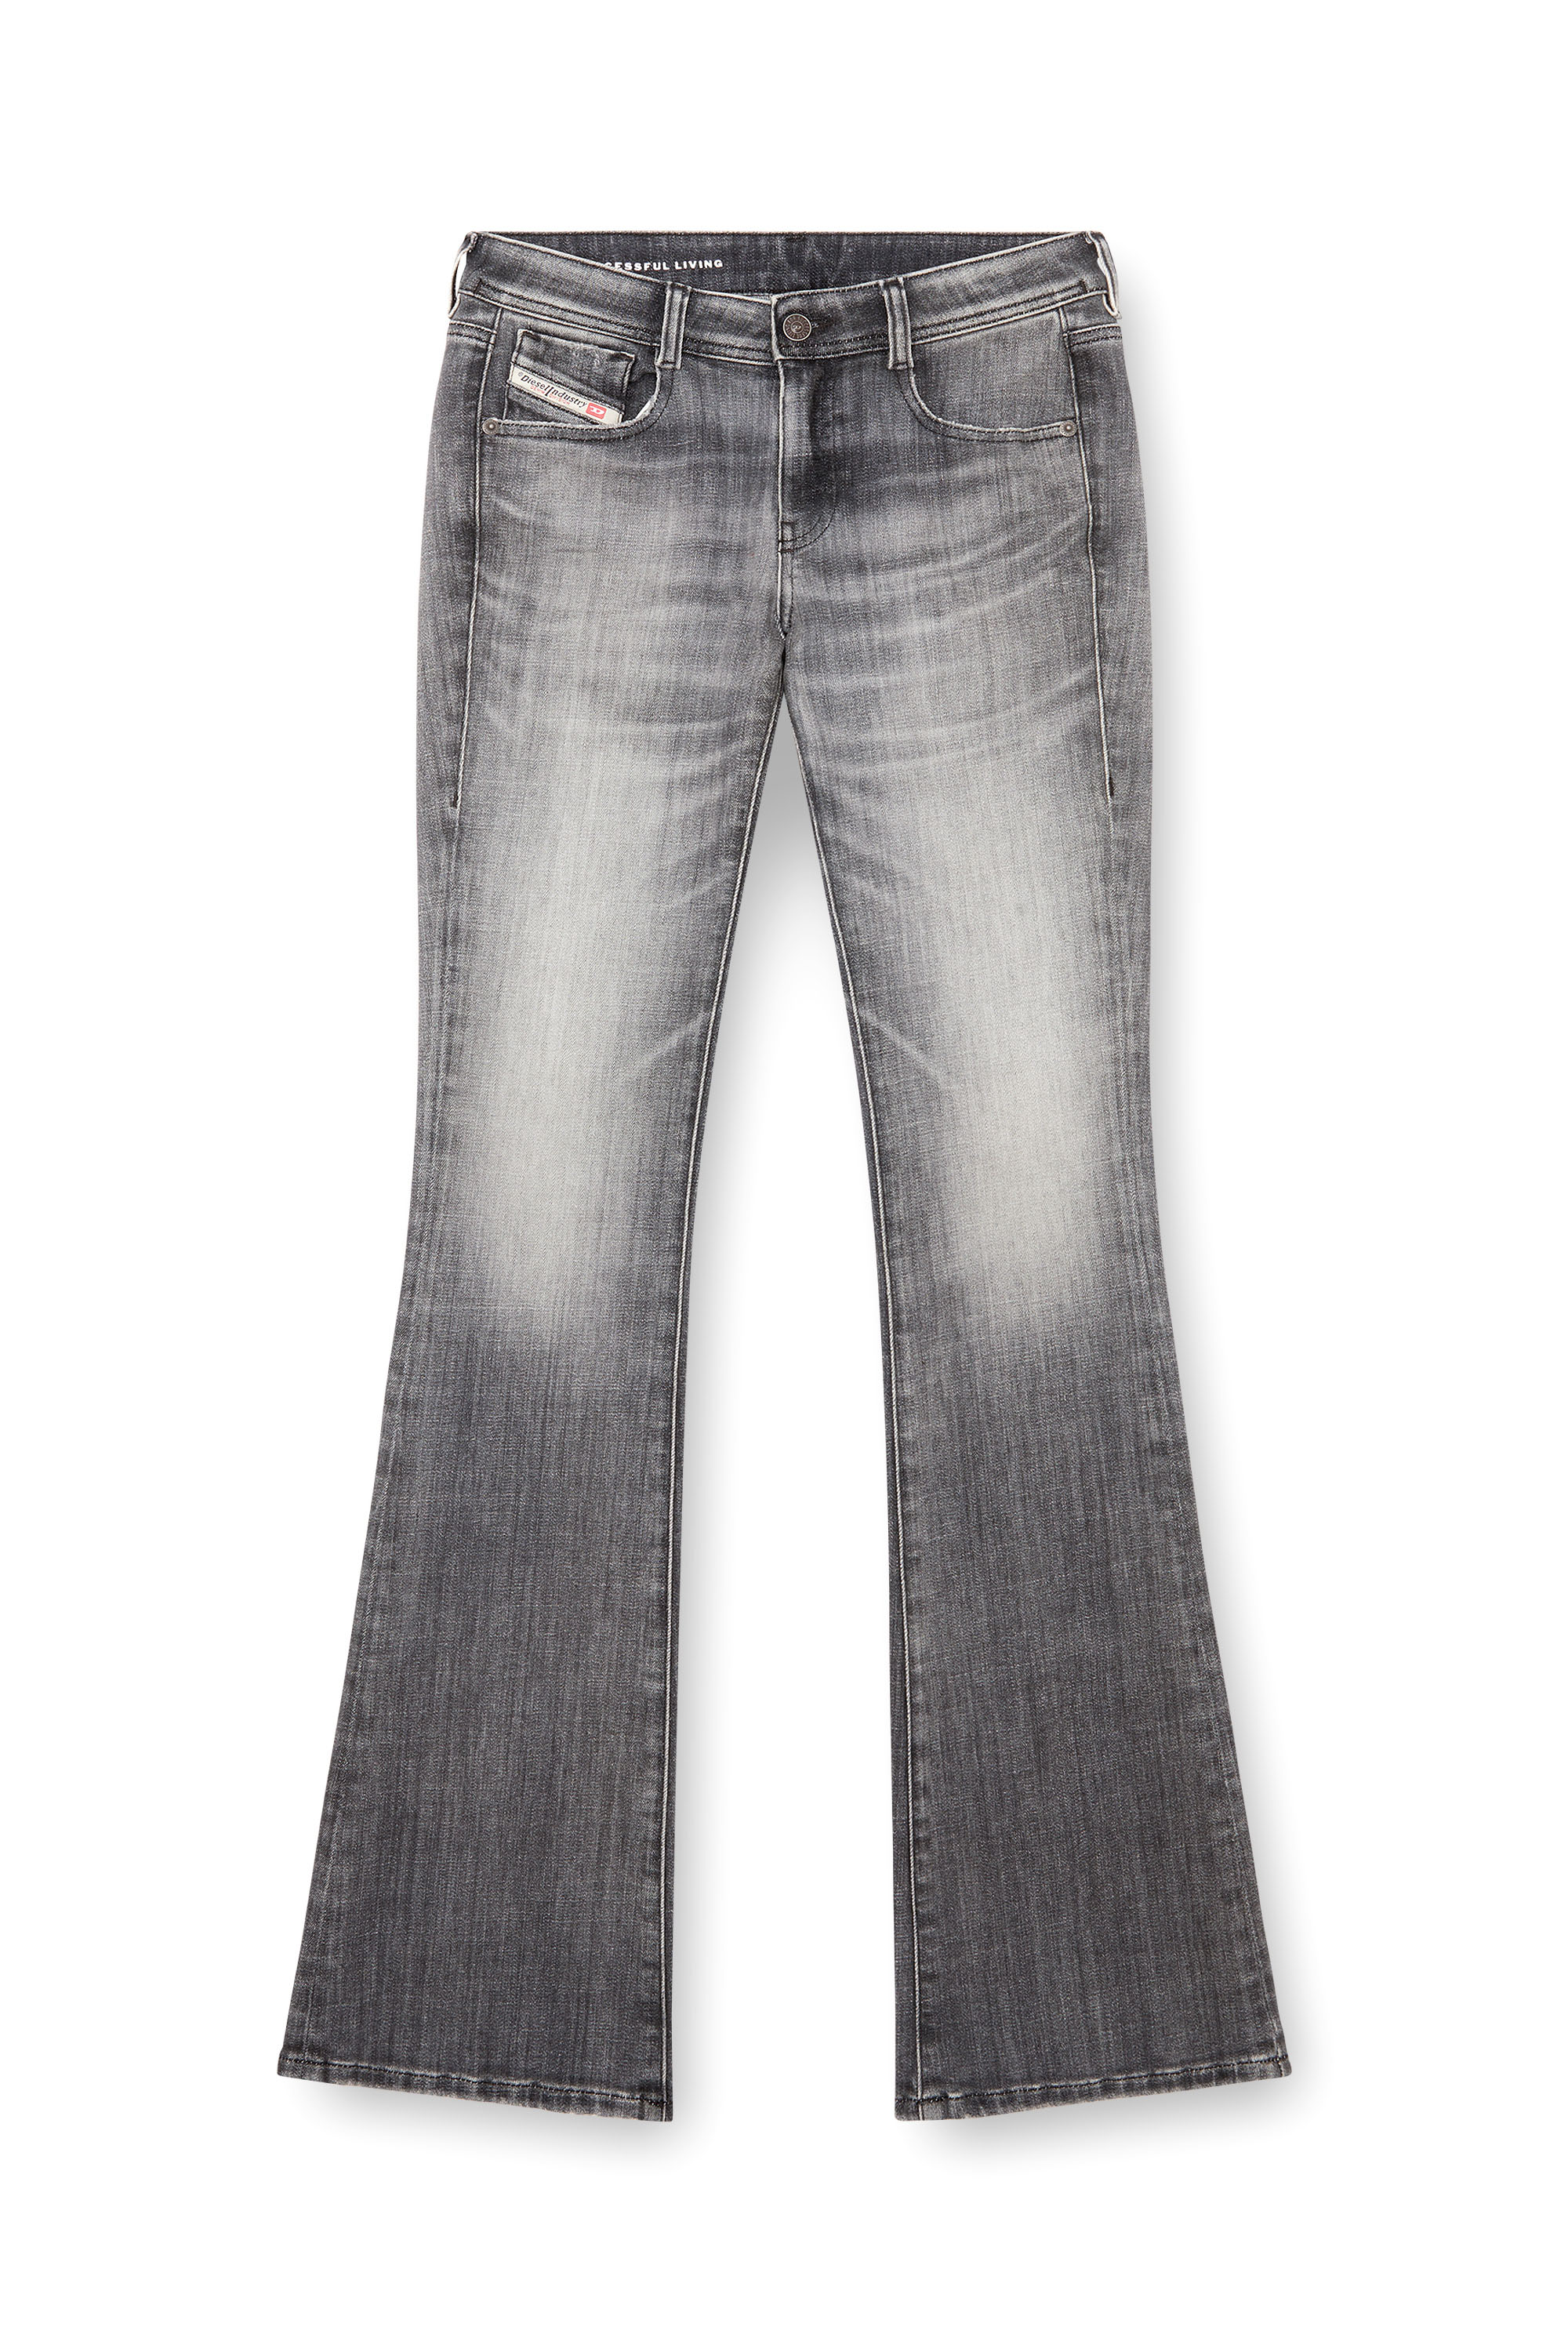 Diesel - Bootcut and Flare Jeans 1969 D-Ebbey 09J29, Mujer Bootcut y Flare Jeans - 1969 D-Ebbey in Gris - Image 5